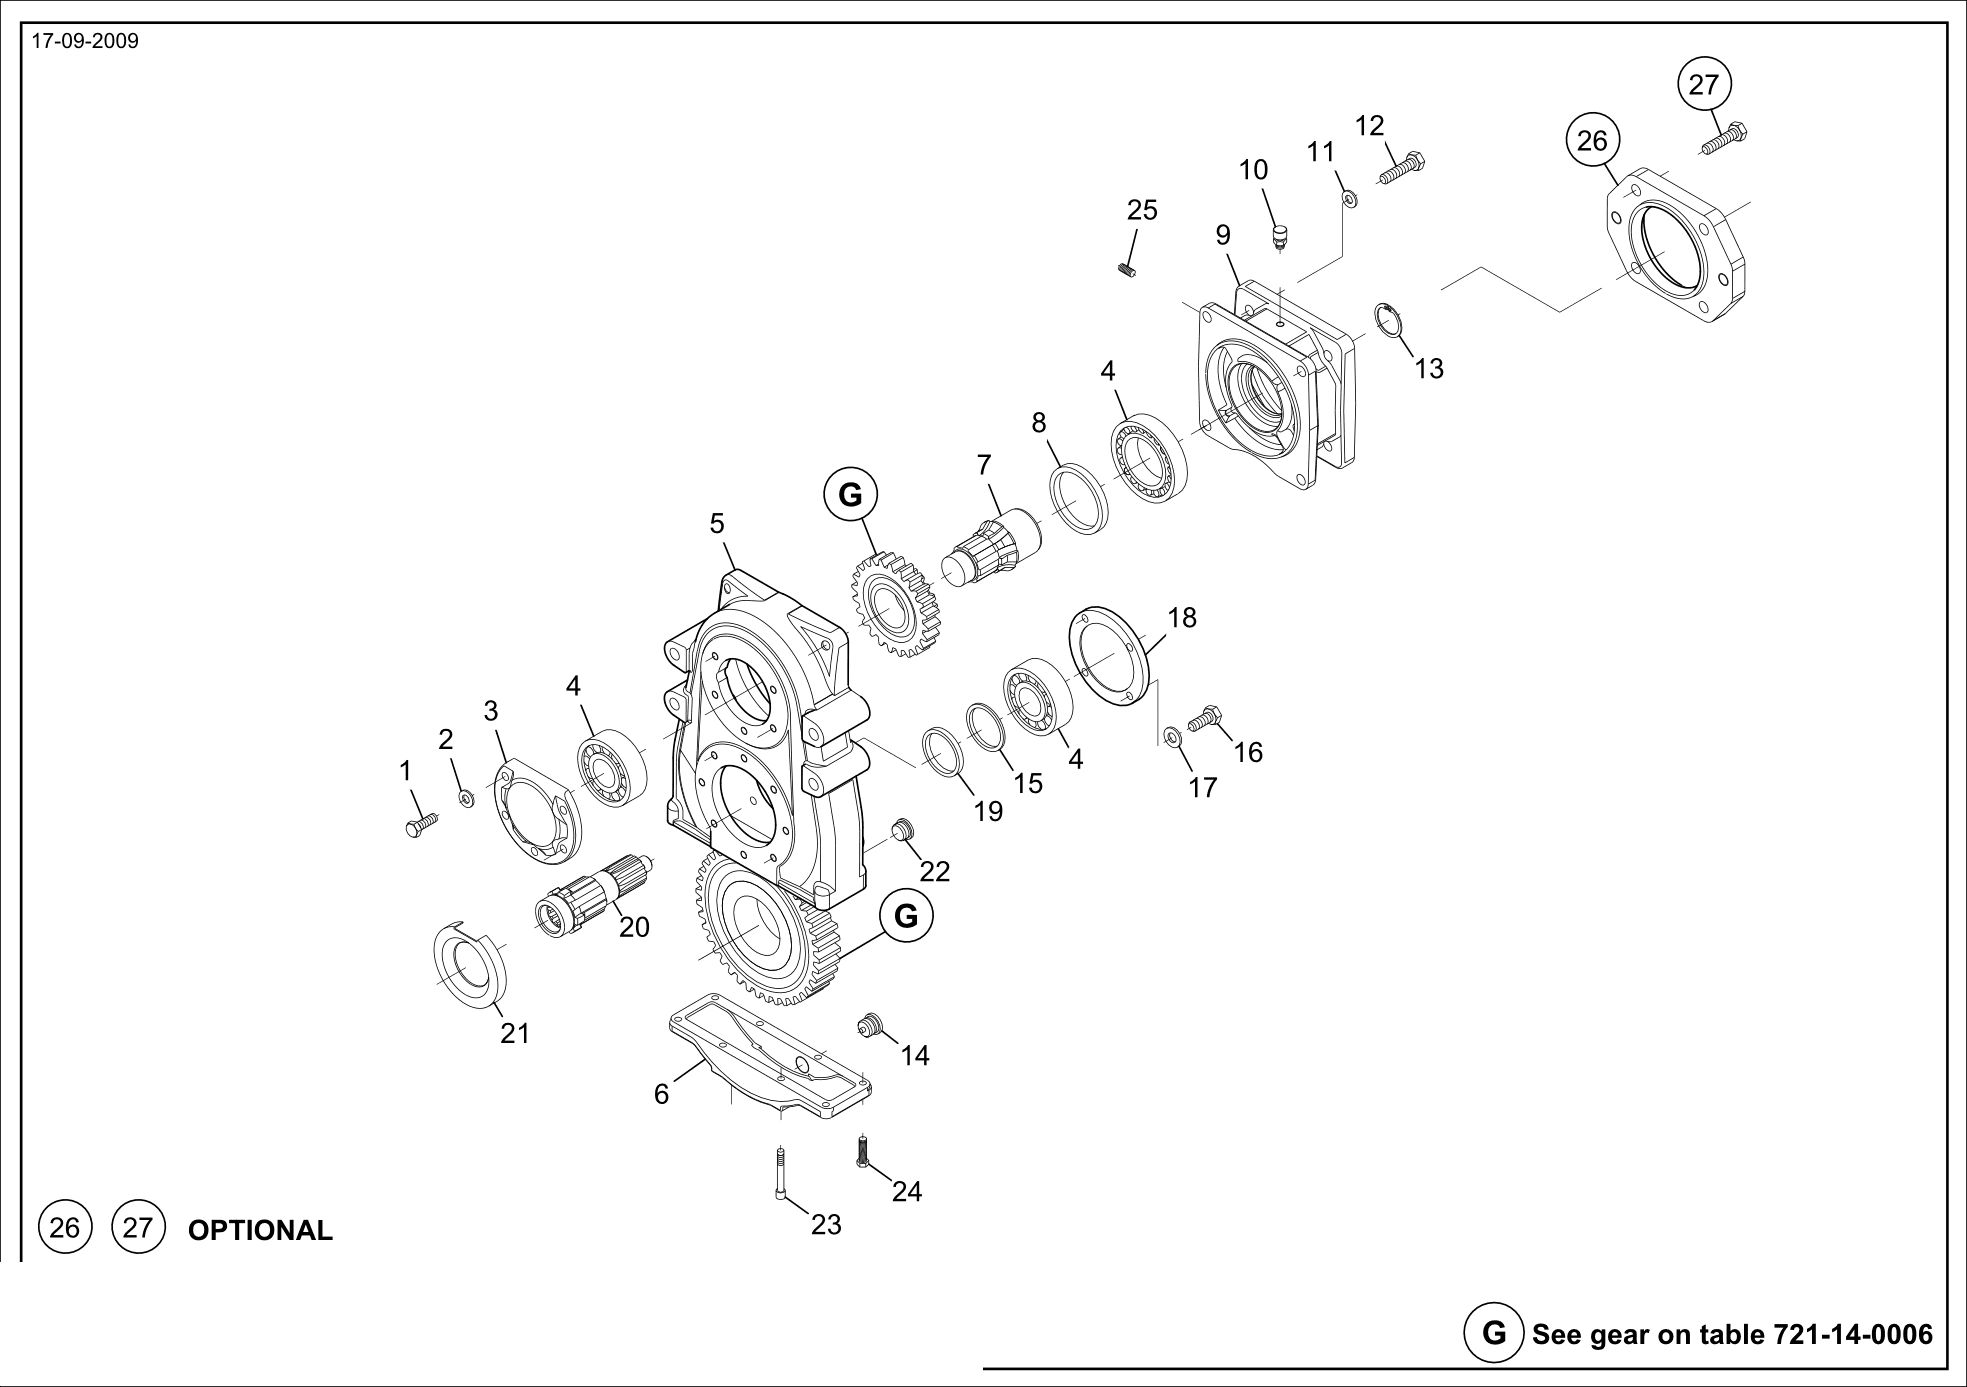 drawing for CNH NEW HOLLAND 153310372 - BEARING (figure 5)